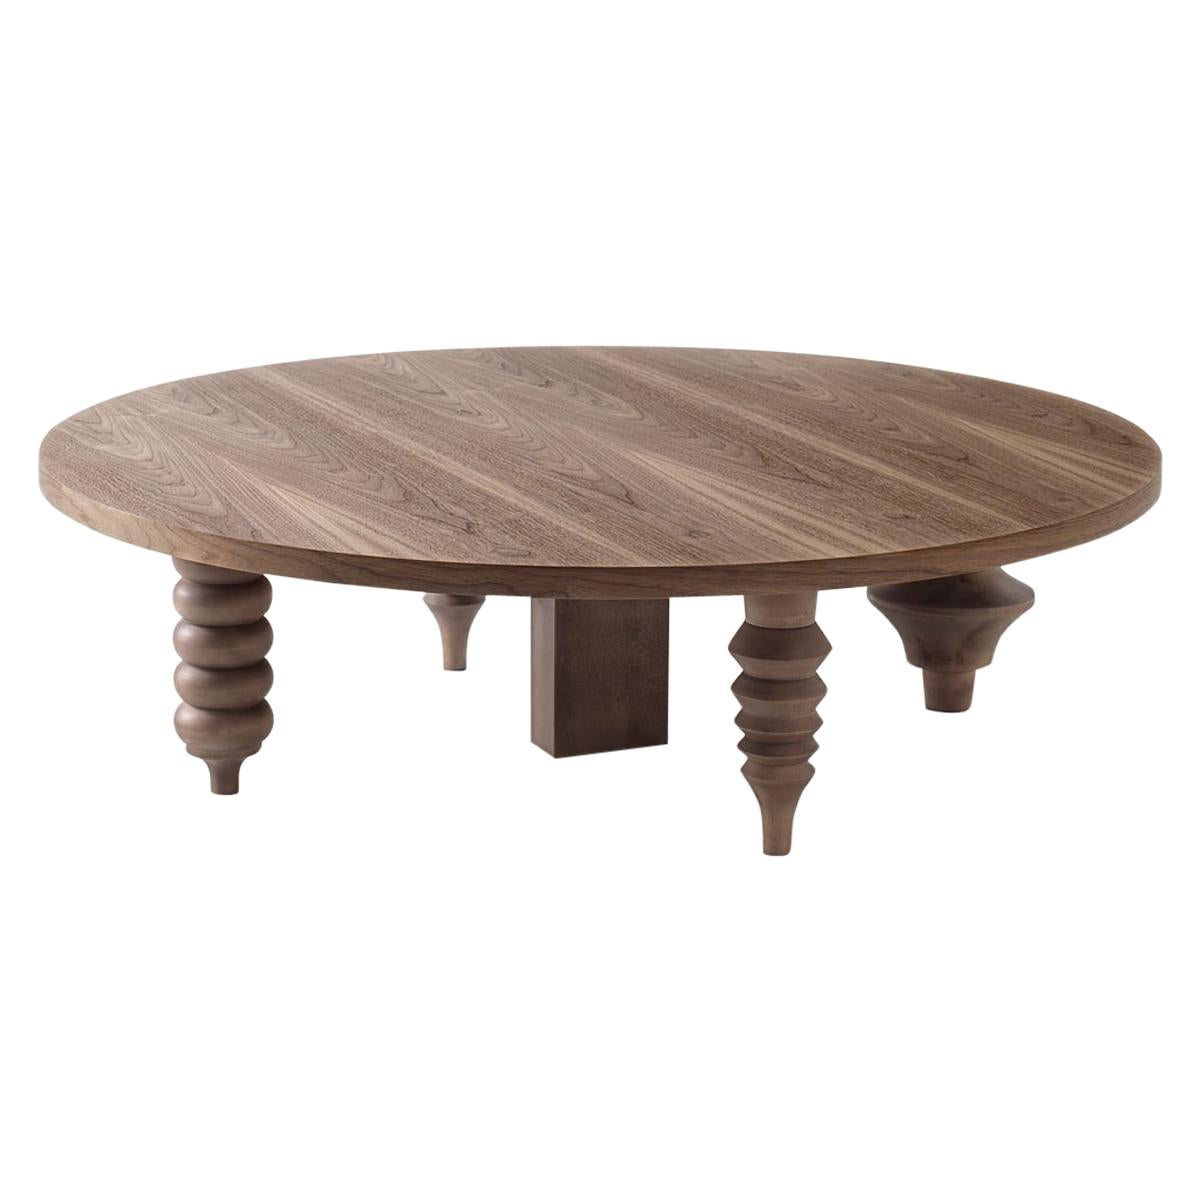 Round Multileg Low Coffee Table In Walnut Natural Wood Finish  Living room  For Sale